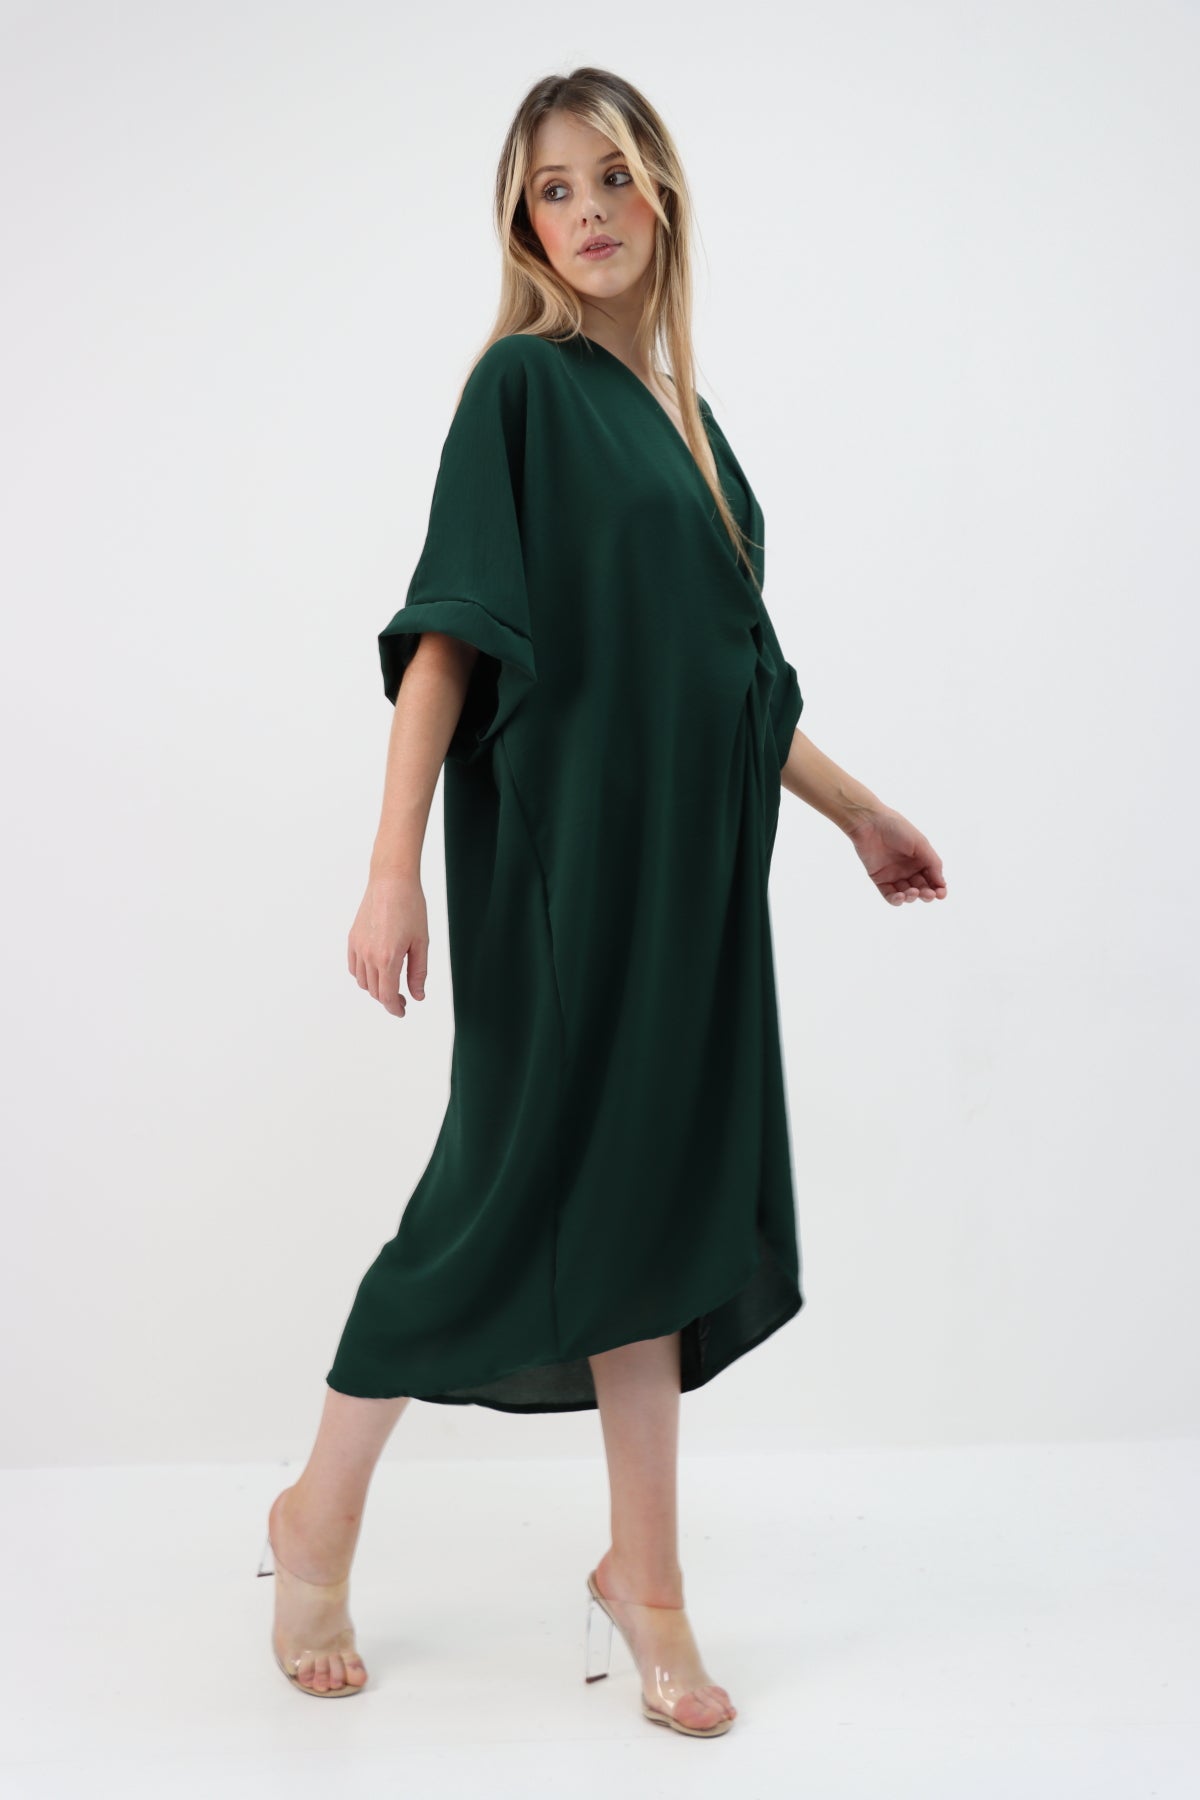 Made In Italy Twisted Plain Tunic Dress